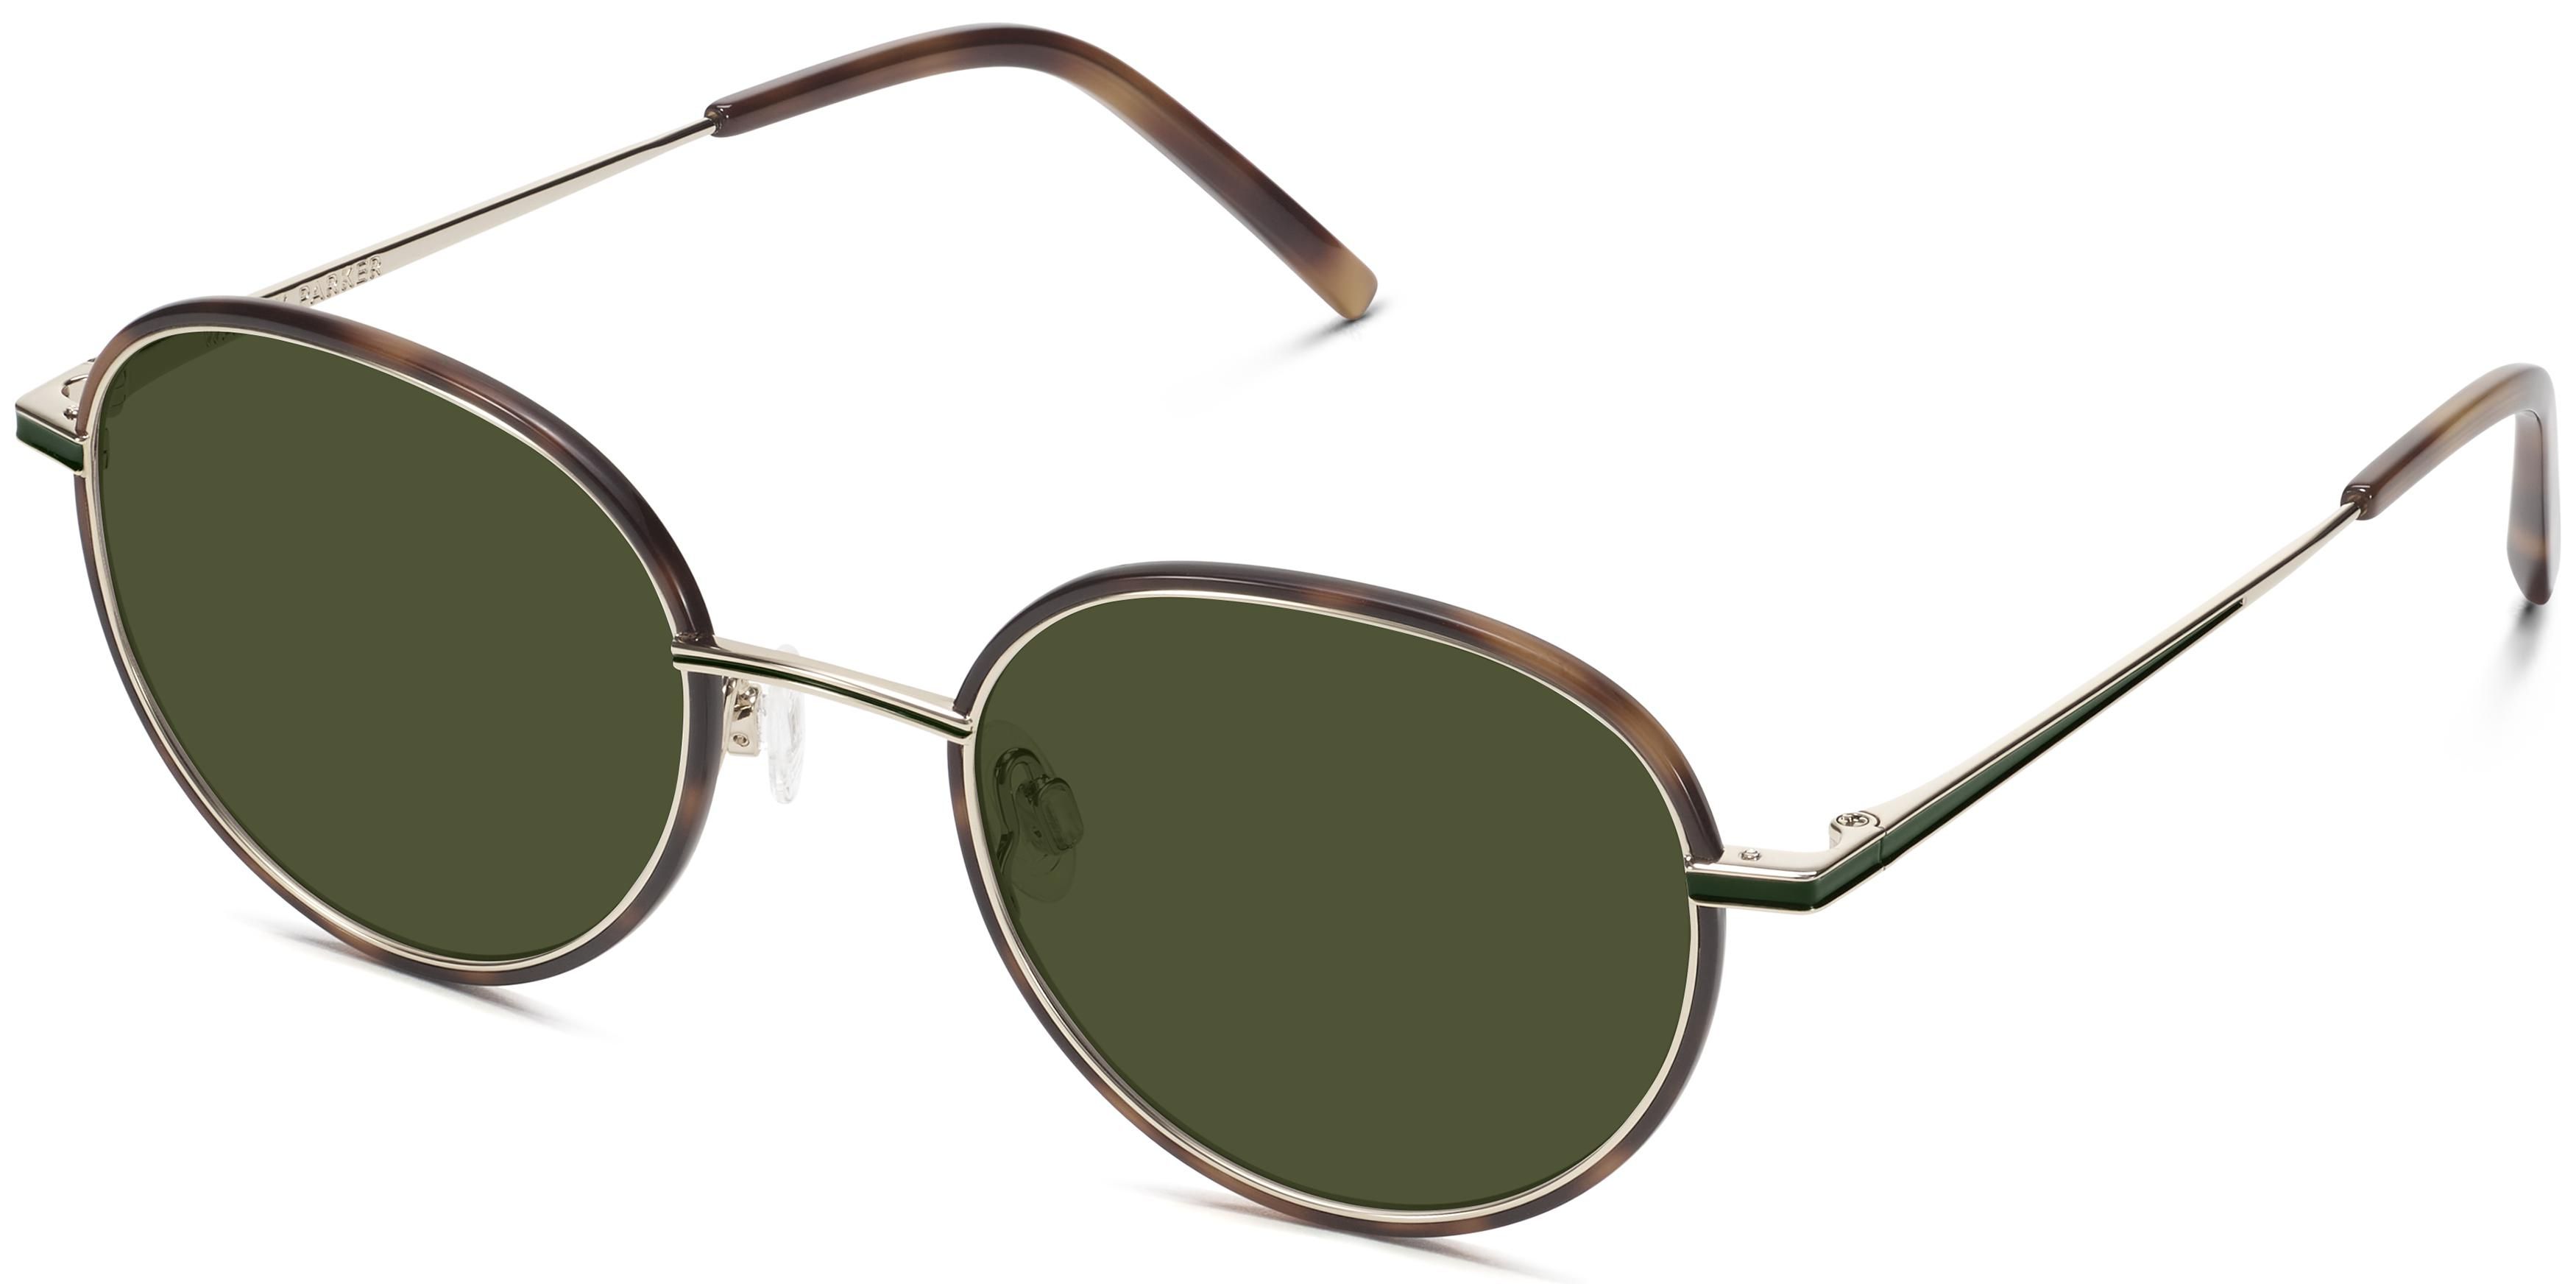 Raider Sunglasses in Polished Gold | Warby Parker | Warby Parker (US)